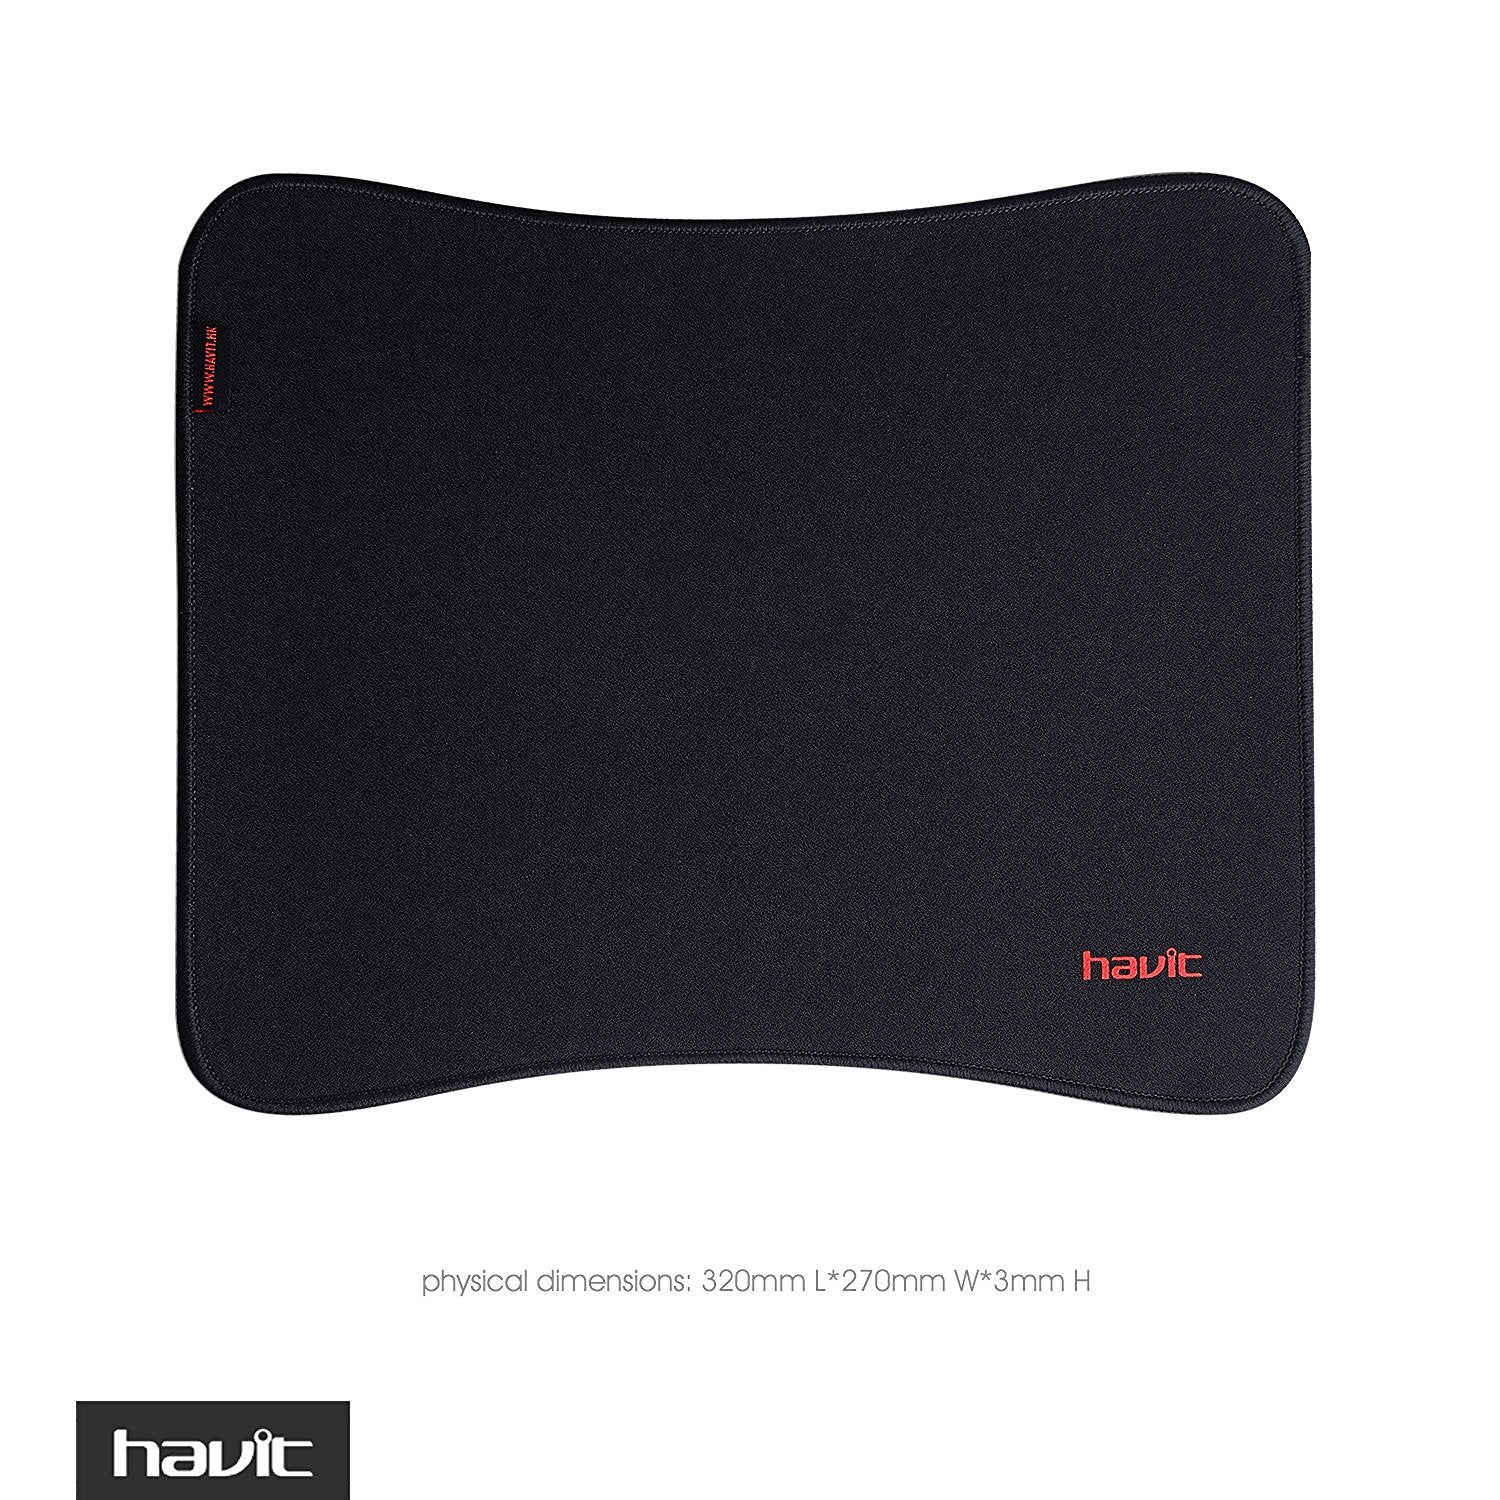 HAVIT HV-MP850 Gaming Mouse Pad, Water-Resistant with Non-slip Rubber Base